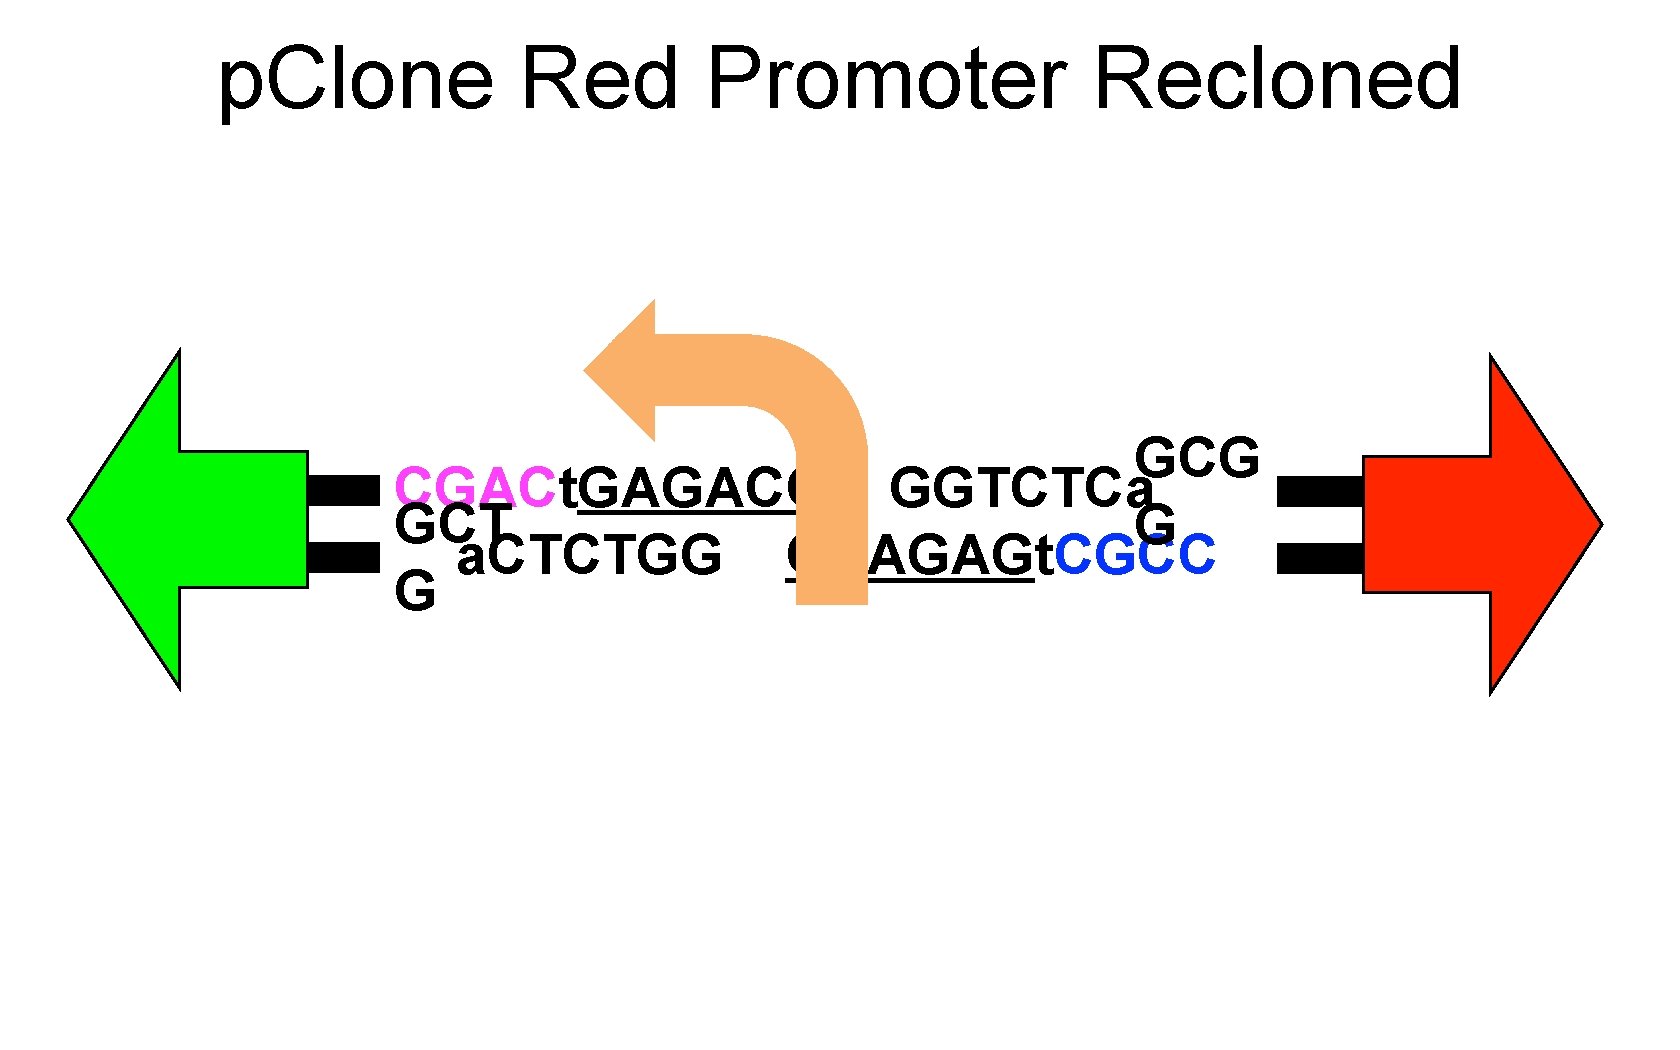 p. Clone Red Promoter Recloned GCG CGACt. GAGACC GGTCTCa GCT G a. CTCTGG CCAGAGt.